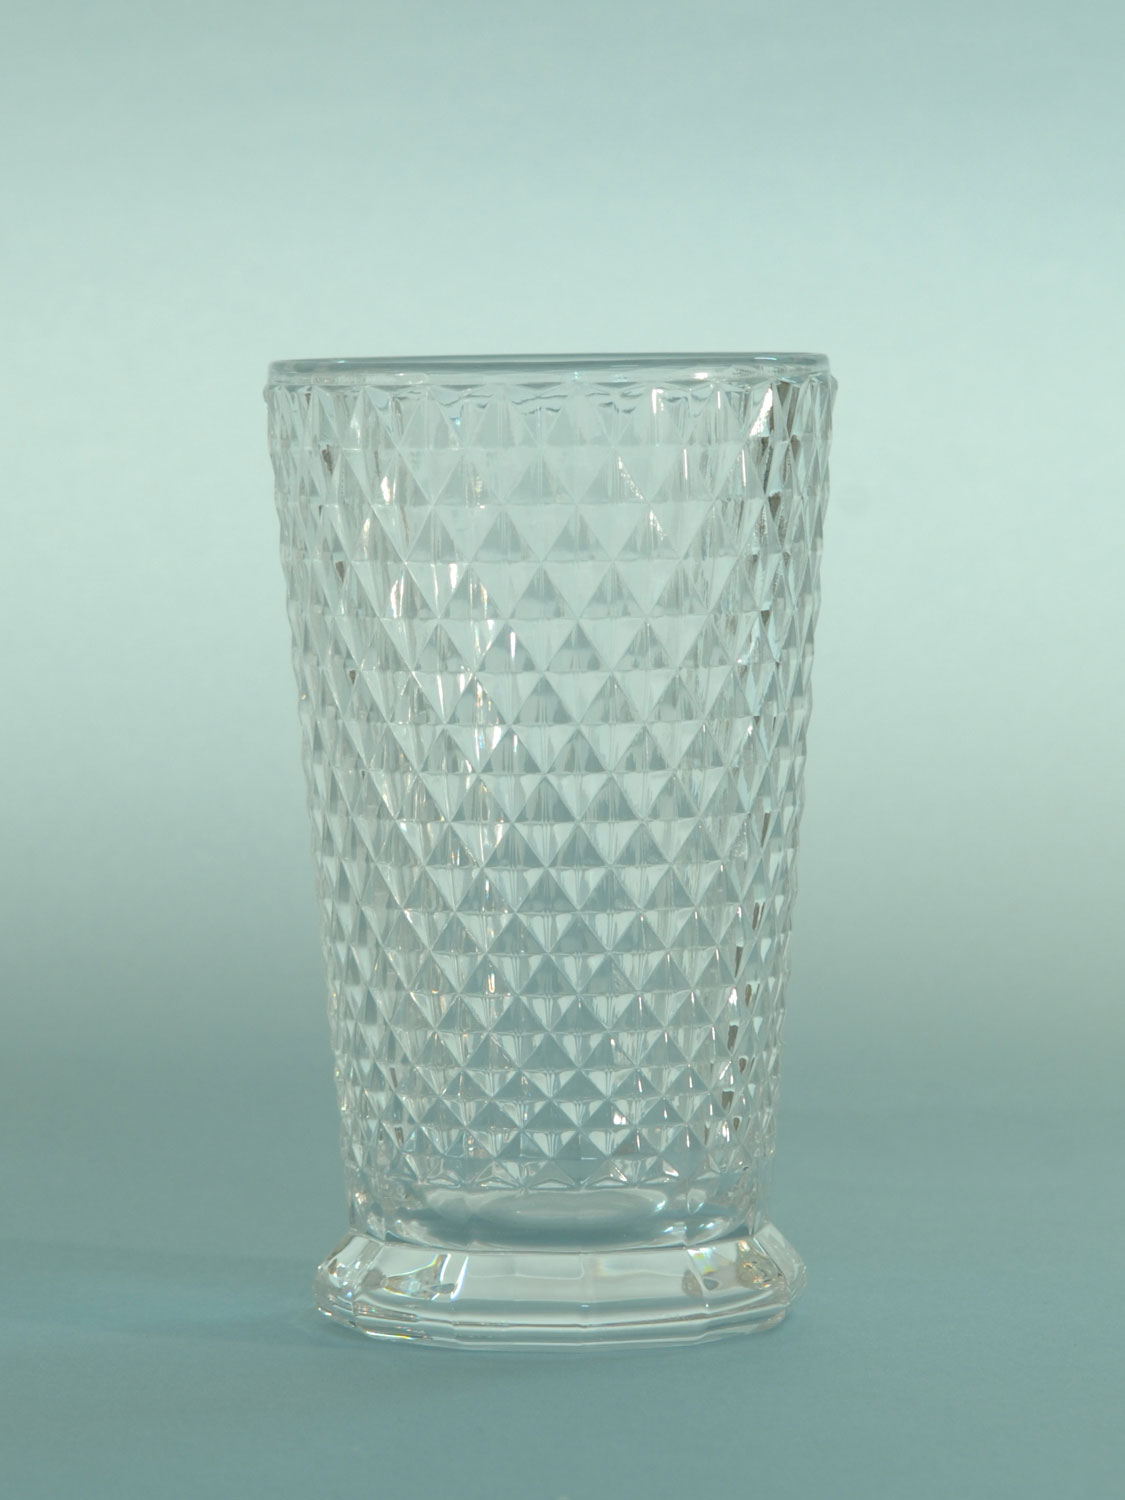 Safety glass for film and TV. Long drink glass with checkered motif. Dimensions: 22.5 x 7 cm